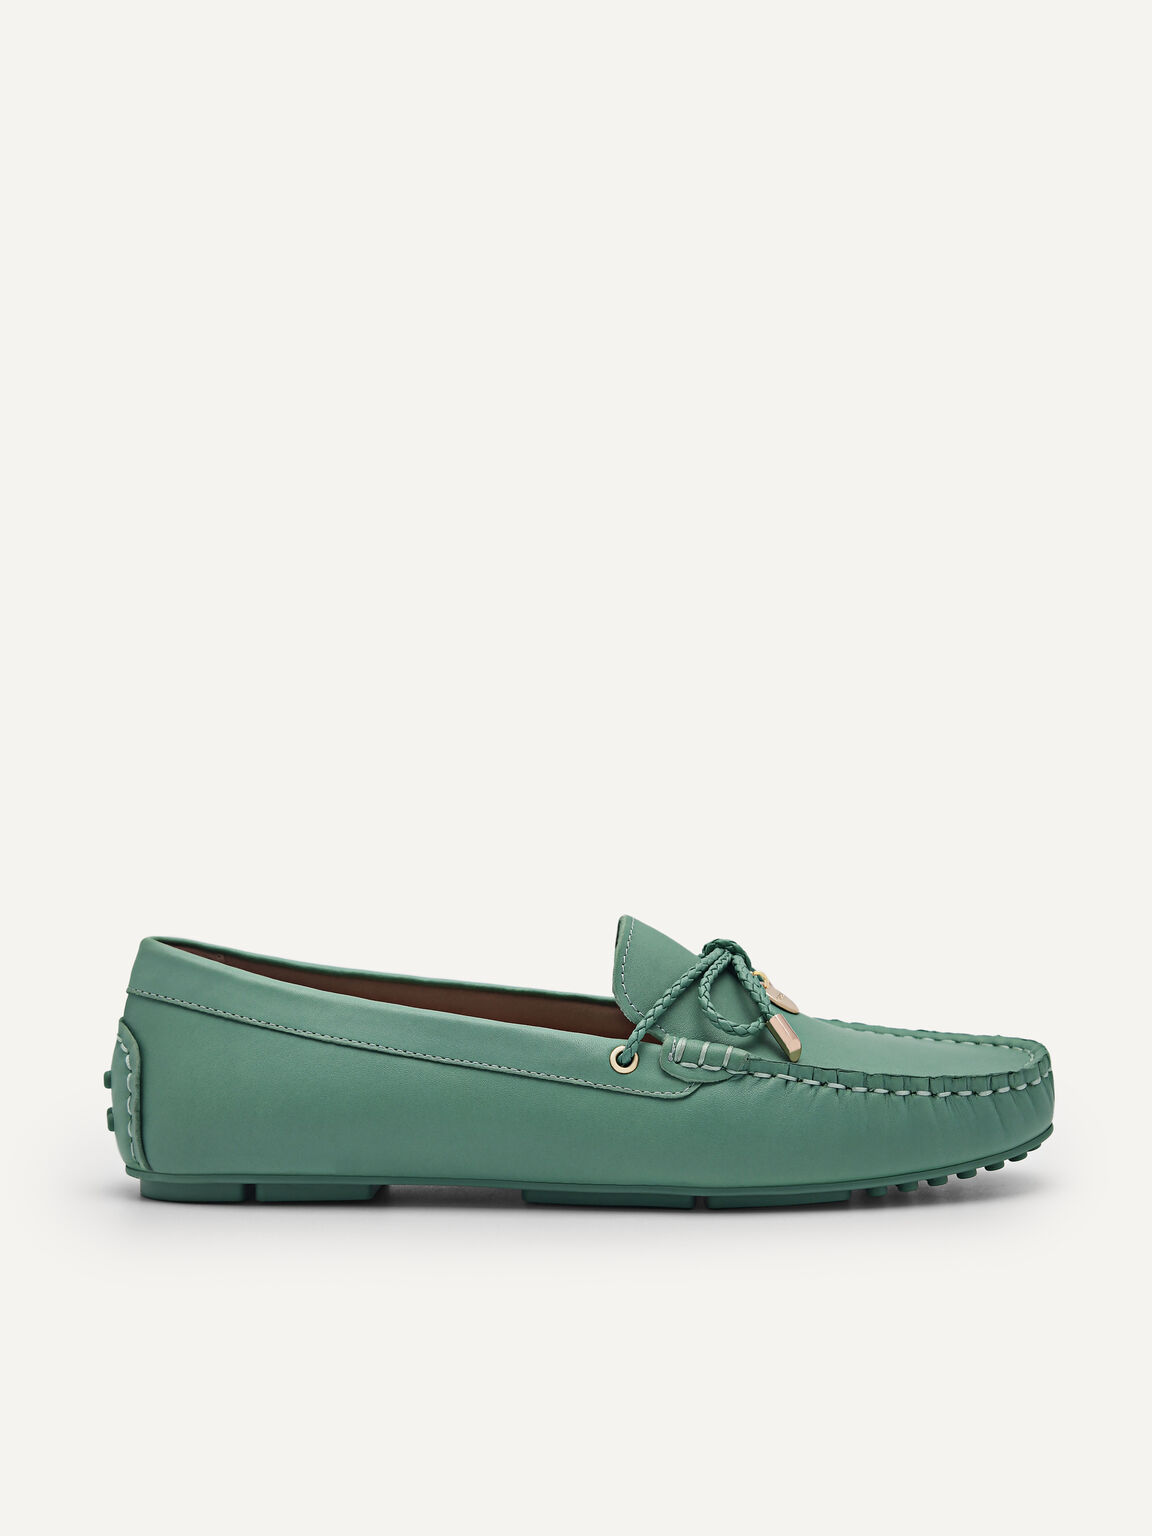 Yasmin Leather Bow Moccasins, Green